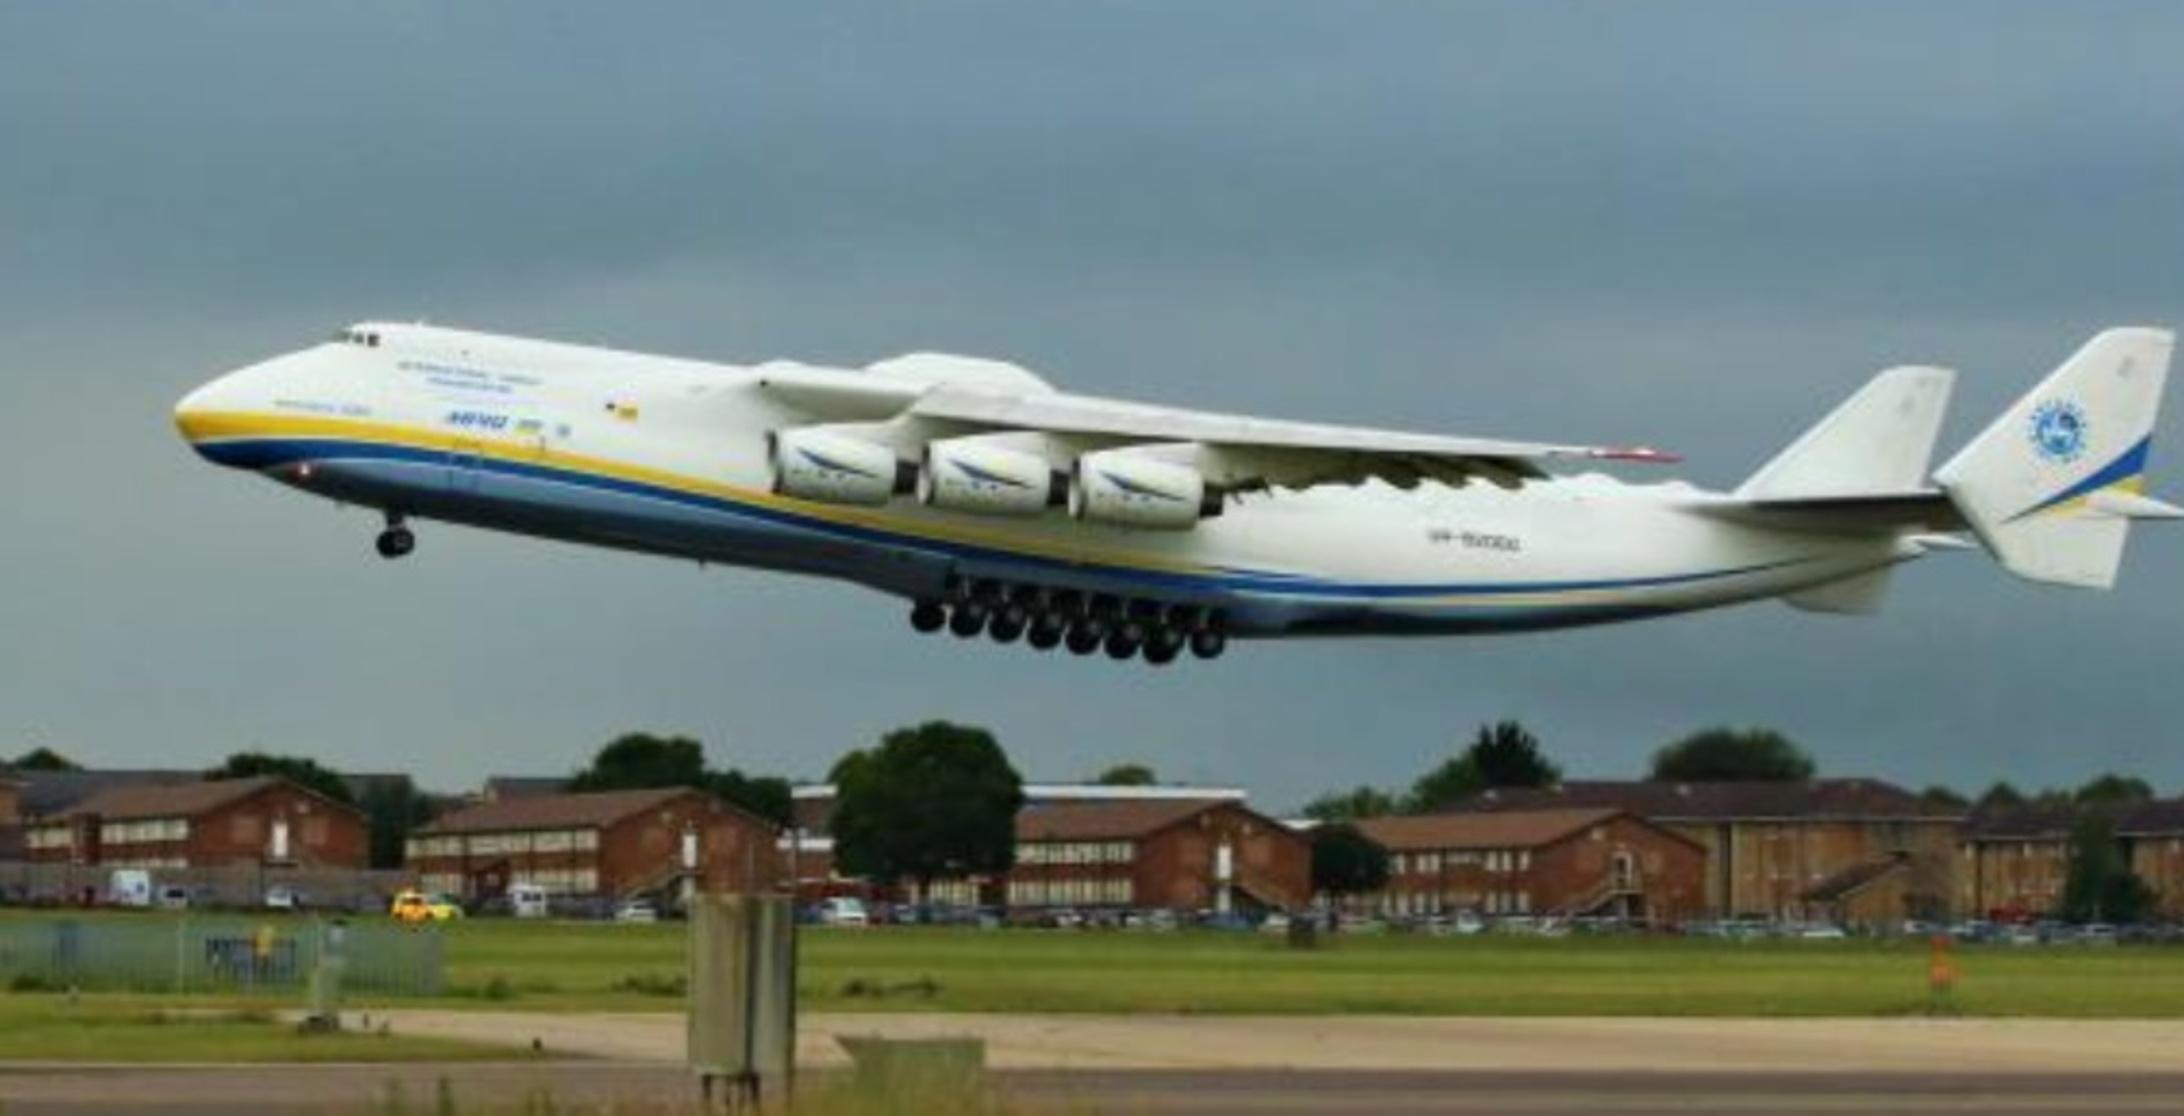 Russia destroyed the largest plane in the world 'Mriya'_60.1